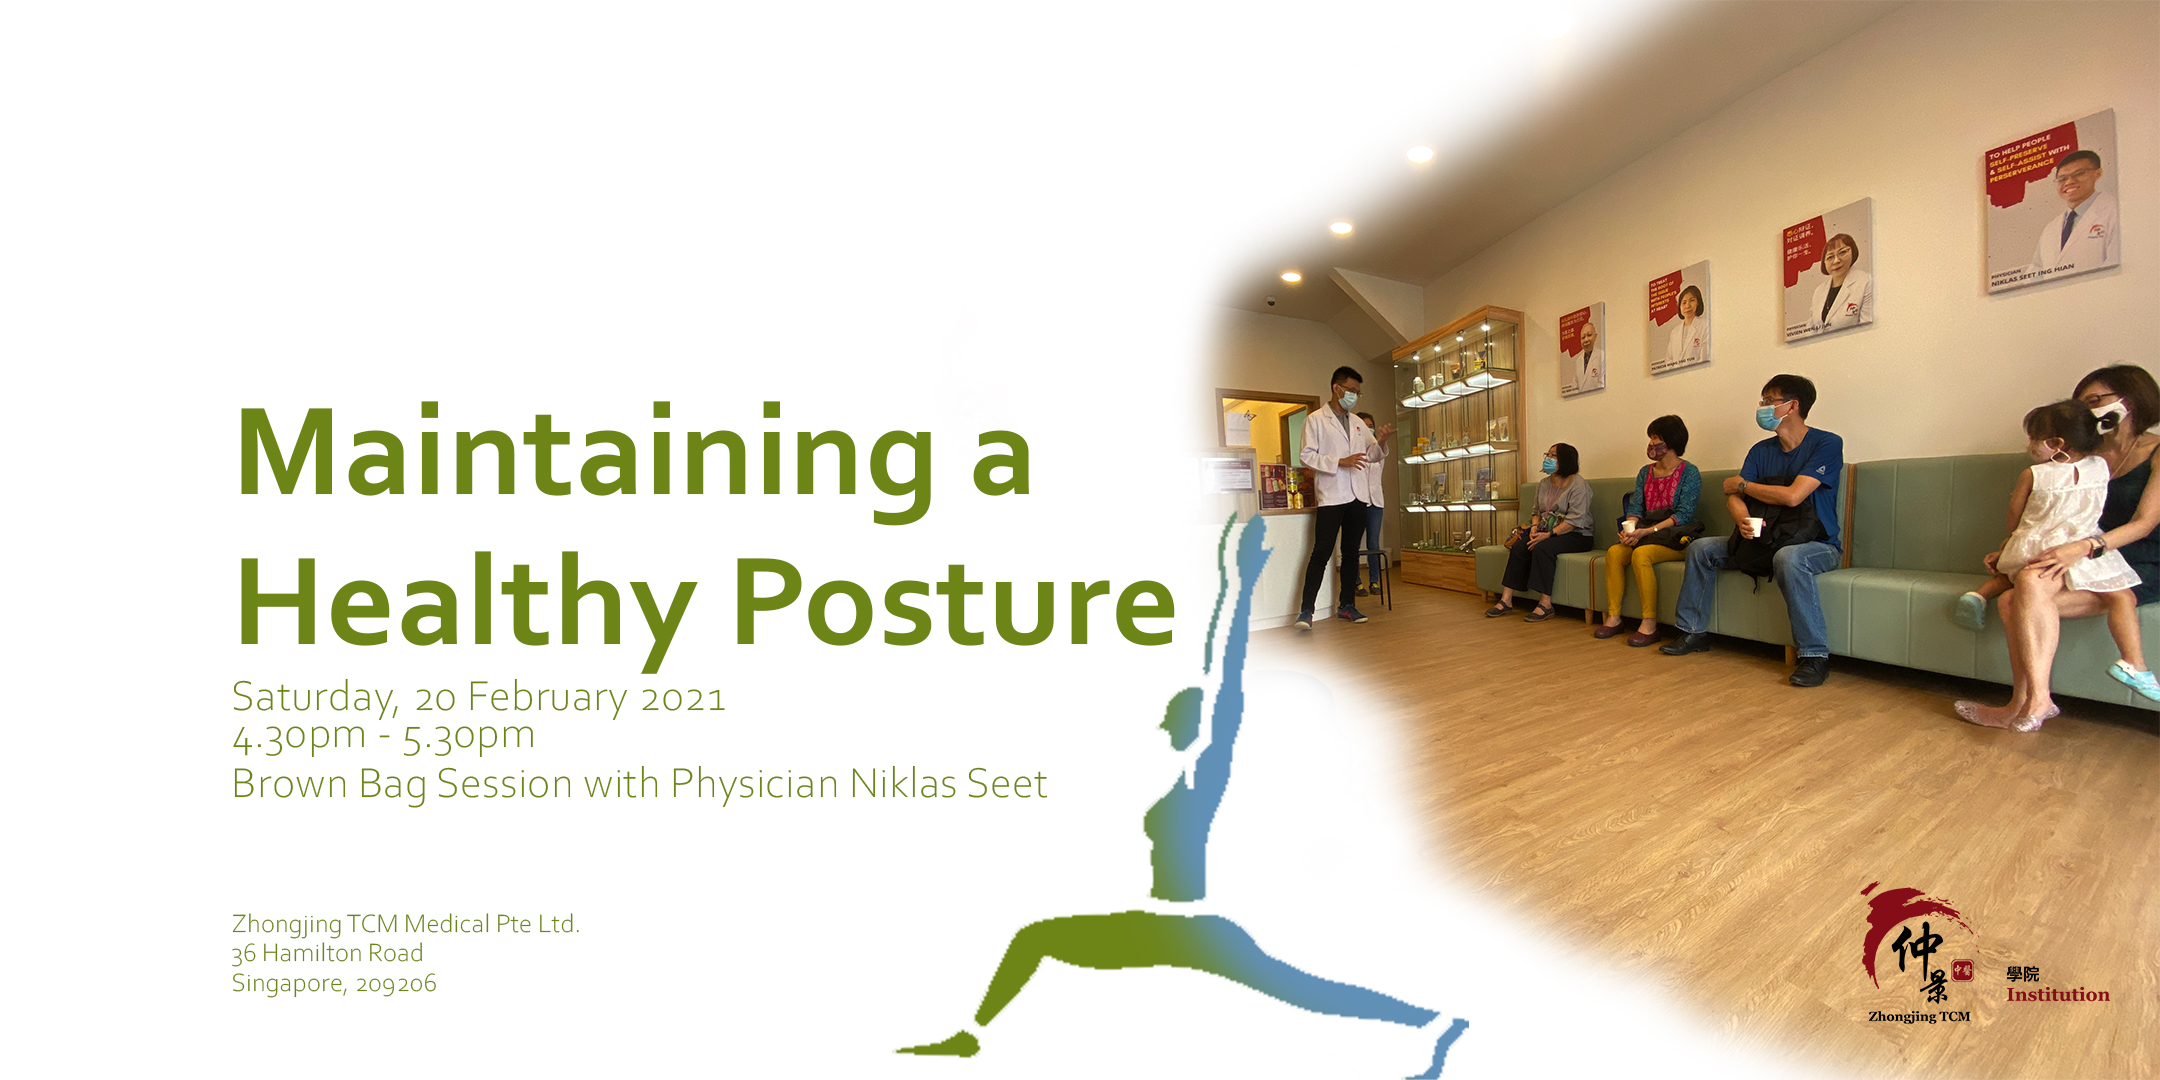 Brown Bag Session: Maintaining a Healthy Posture